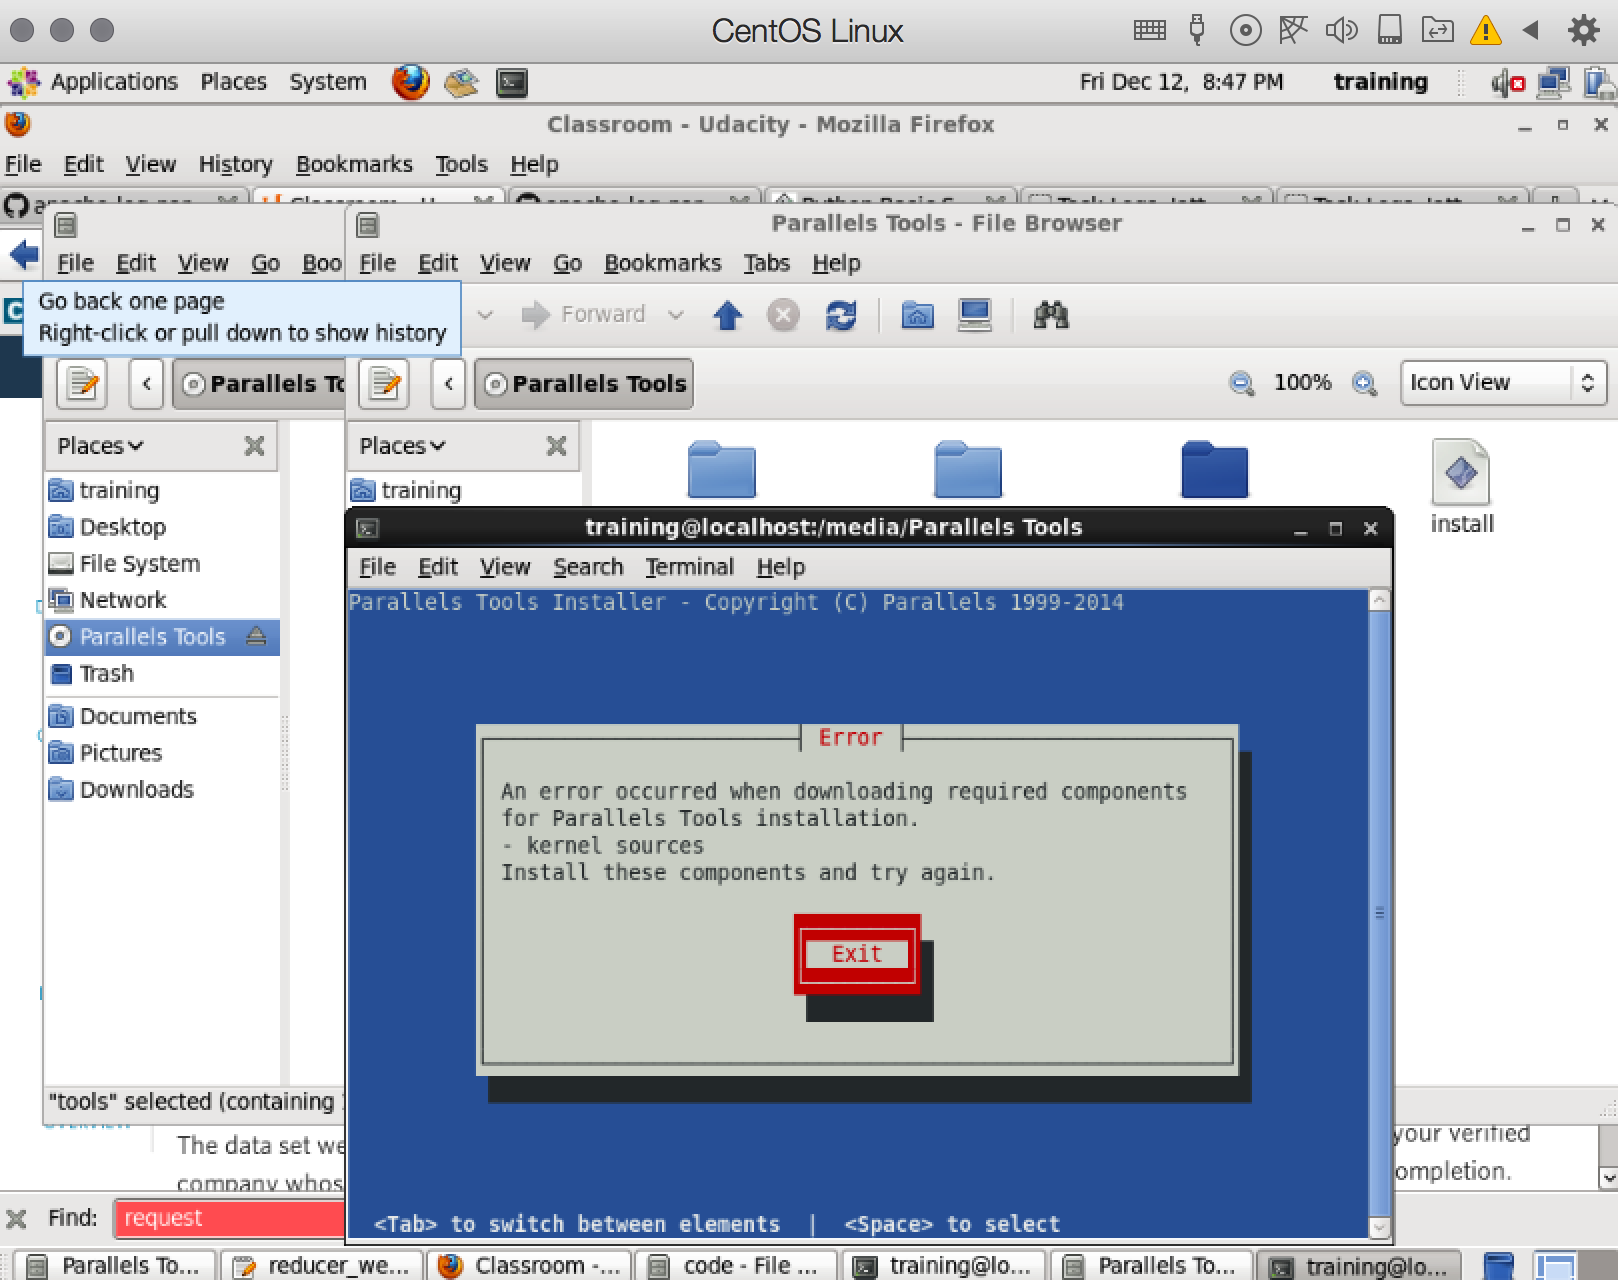 KB Parallels: How to update kernel-devel to install Parallels Tools